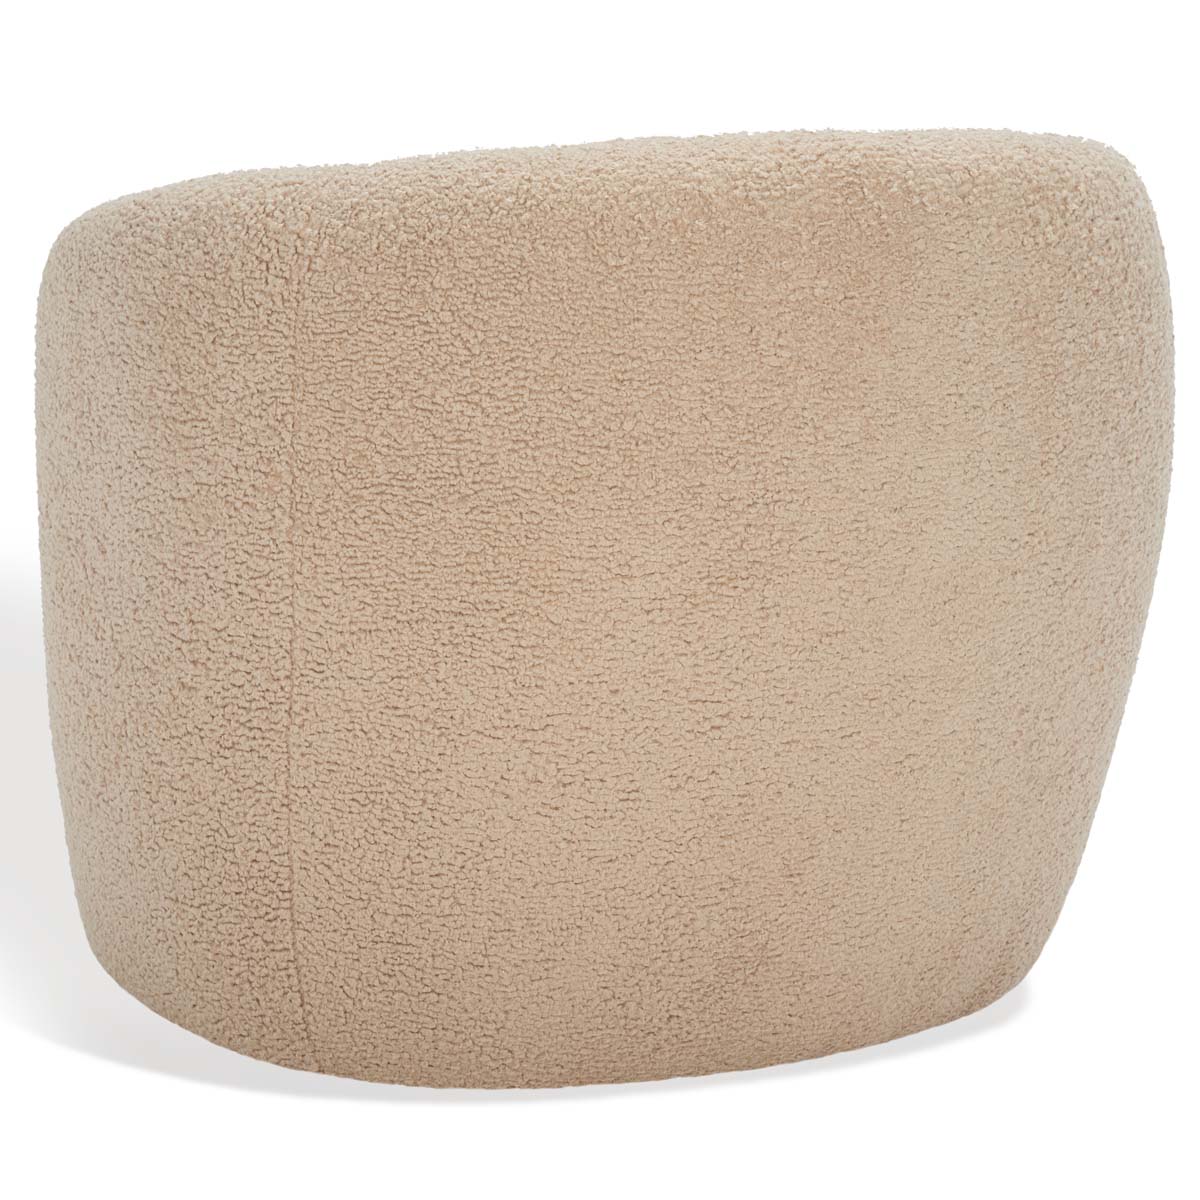 Safavieh Couture Everly Barrel Back Accent Chair - Light Brown